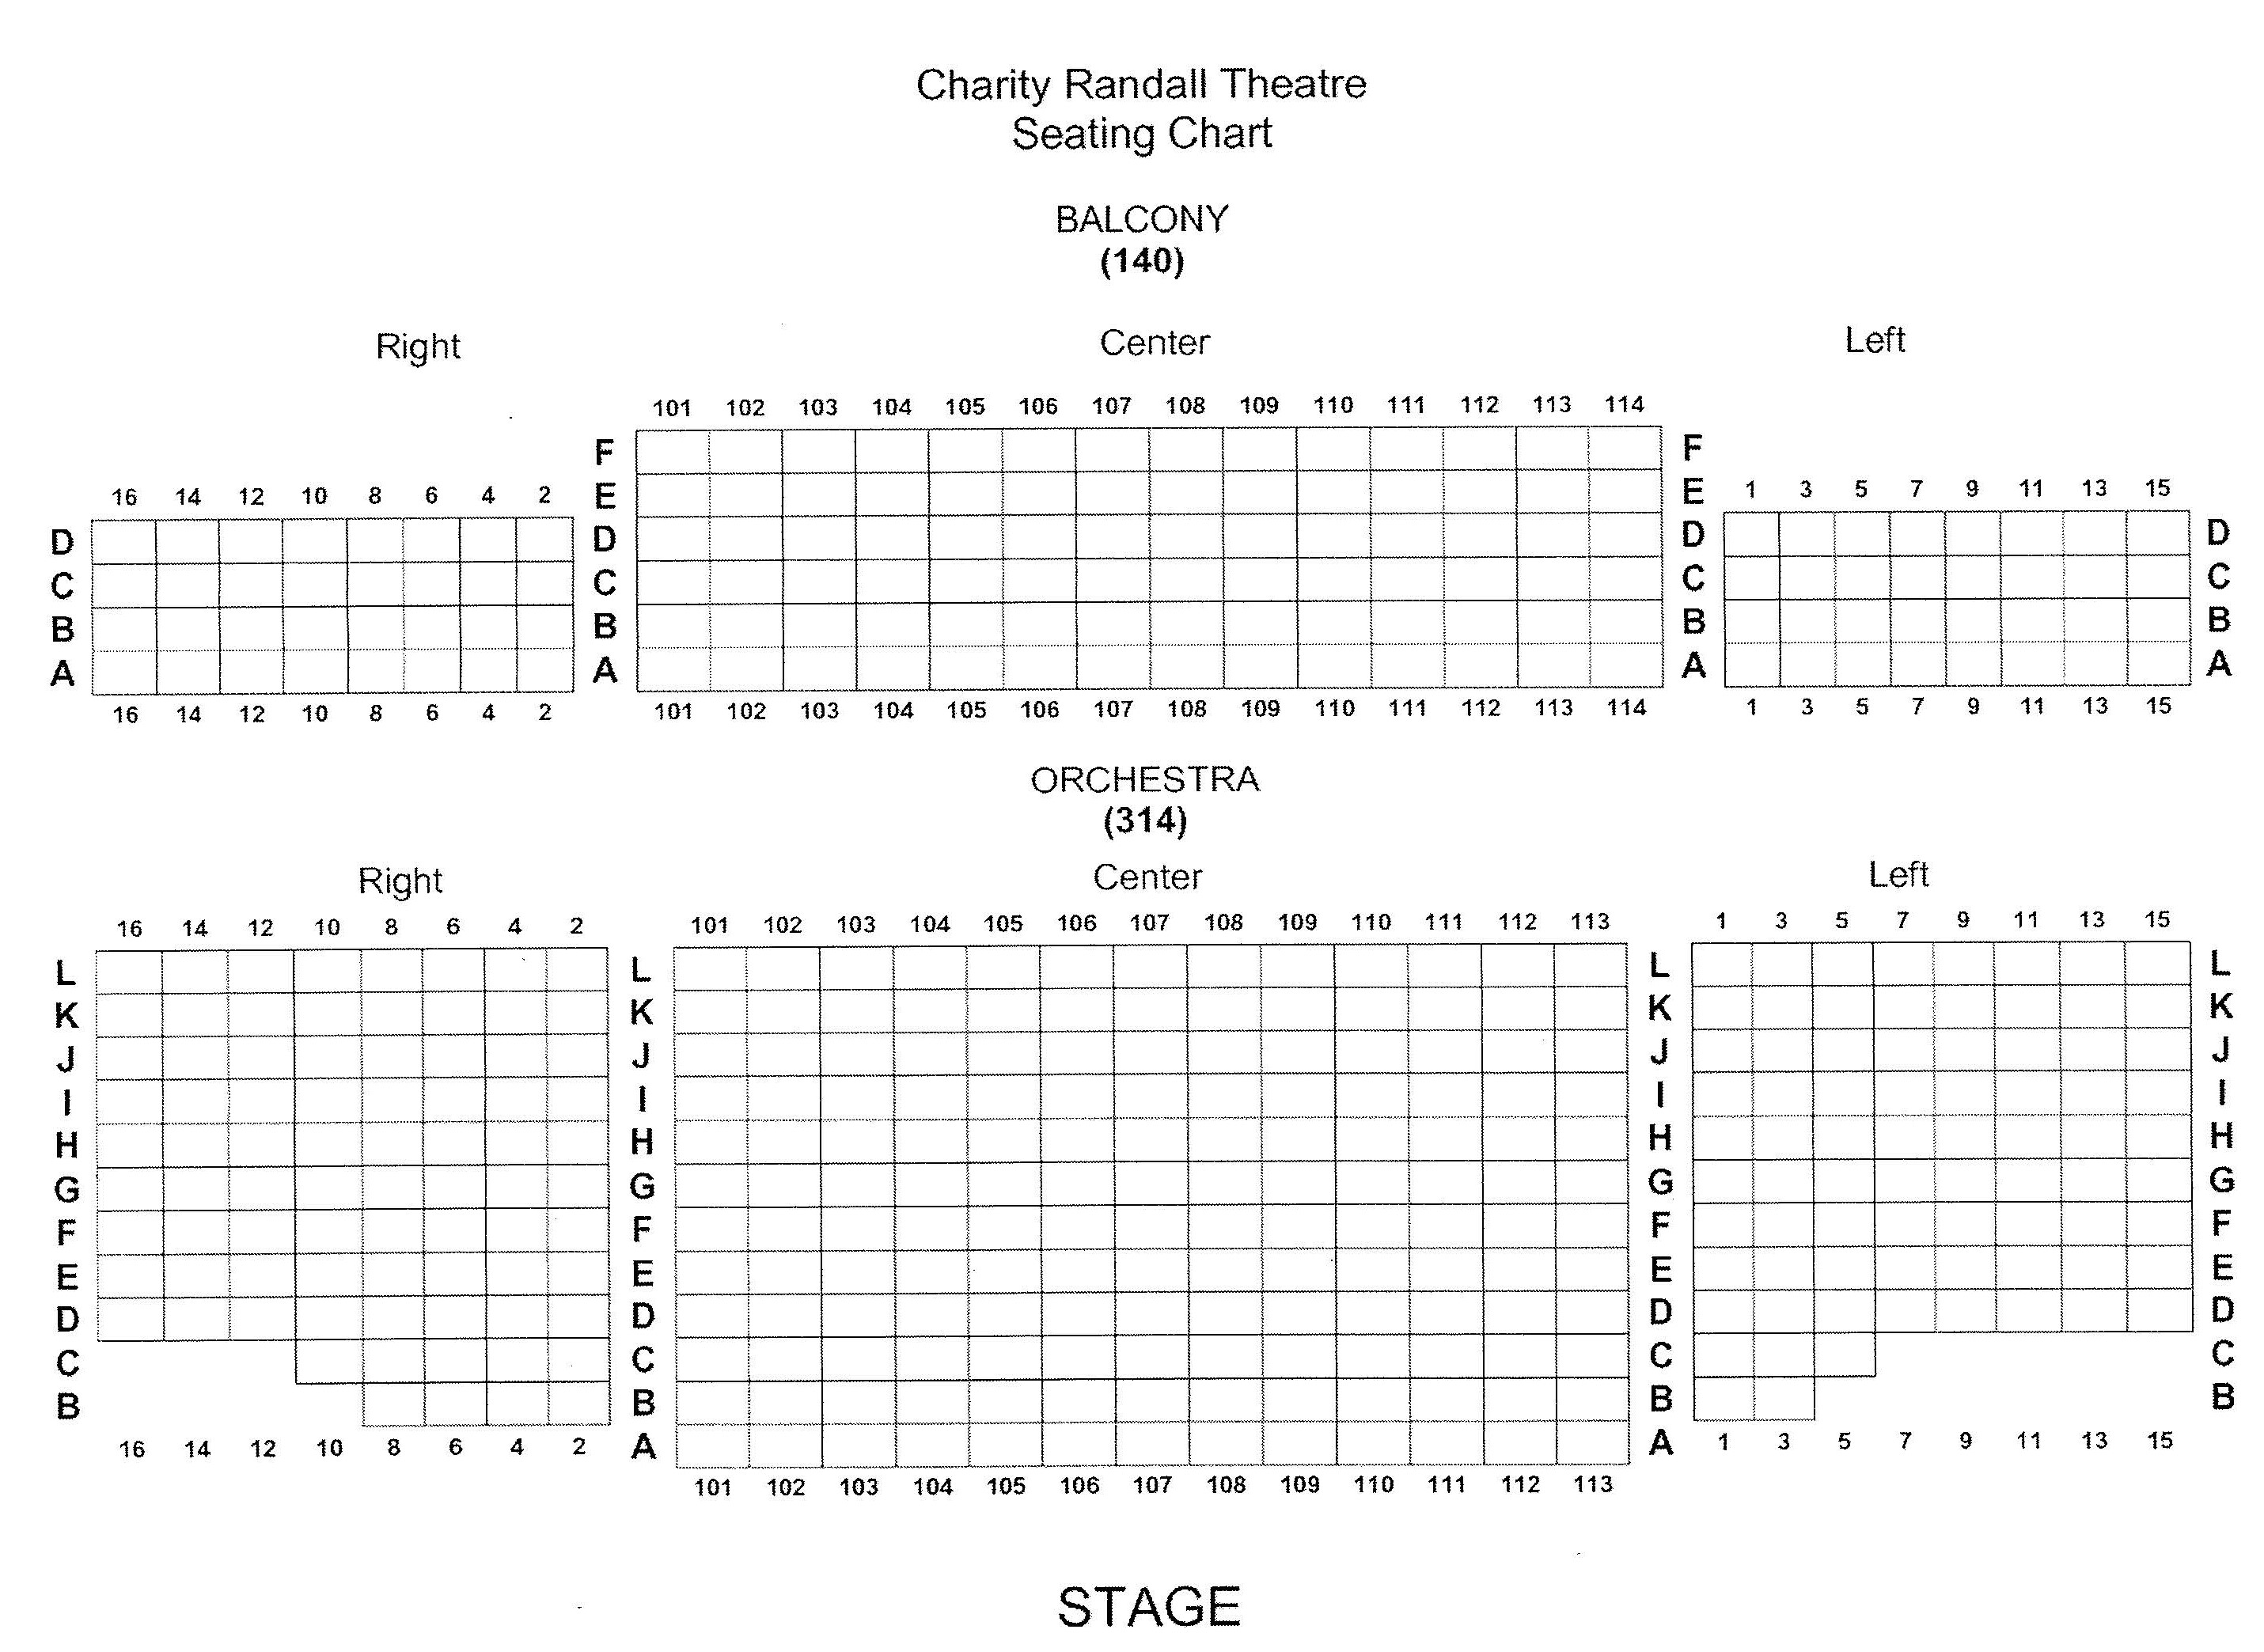 Seating Charts | Department of Theatre Arts | University of ...